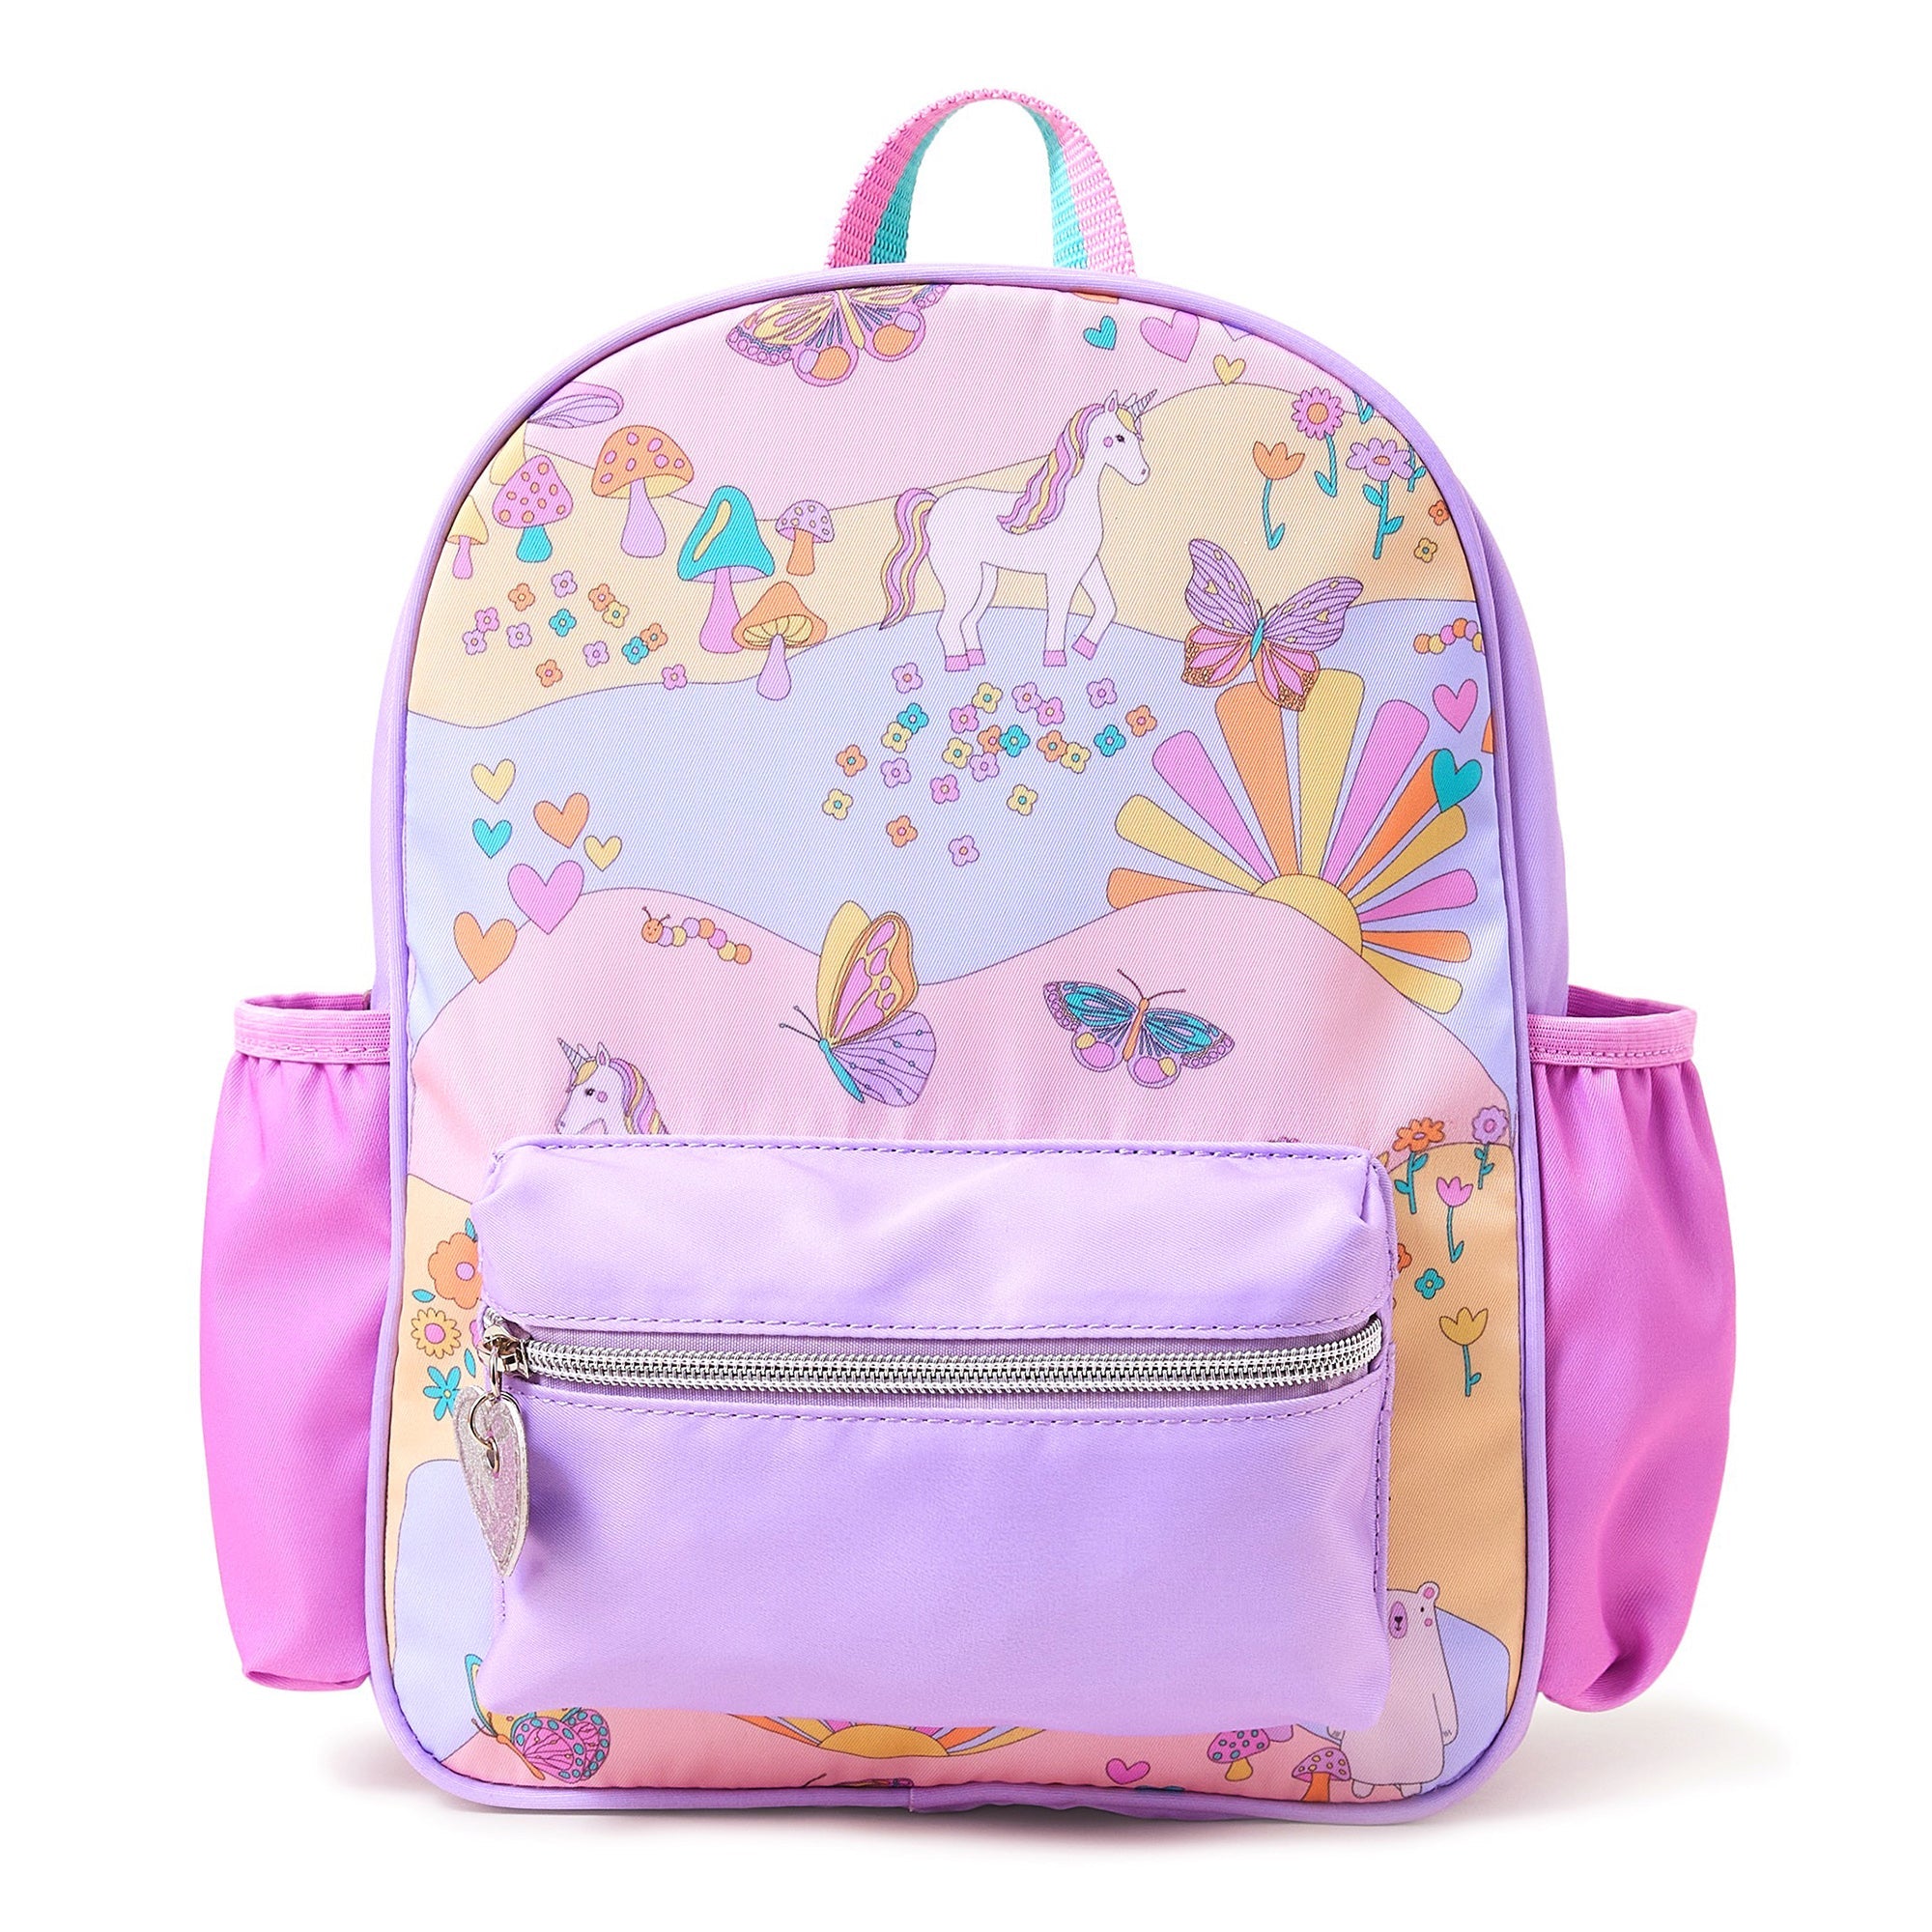 Kids Unicorn Print Backpack Features